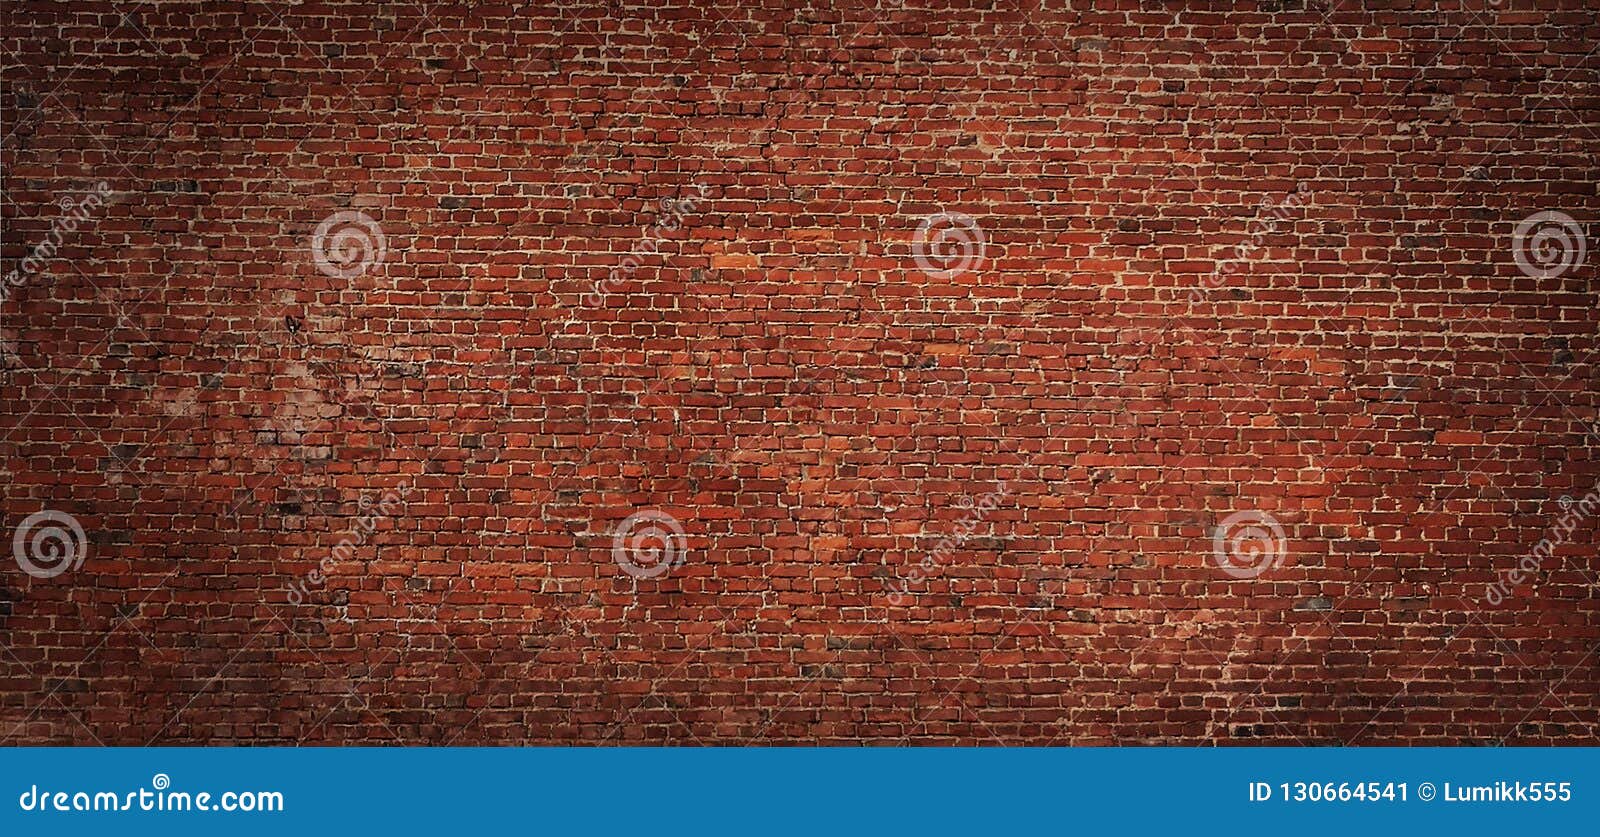 wide angle vintage red brick wall background